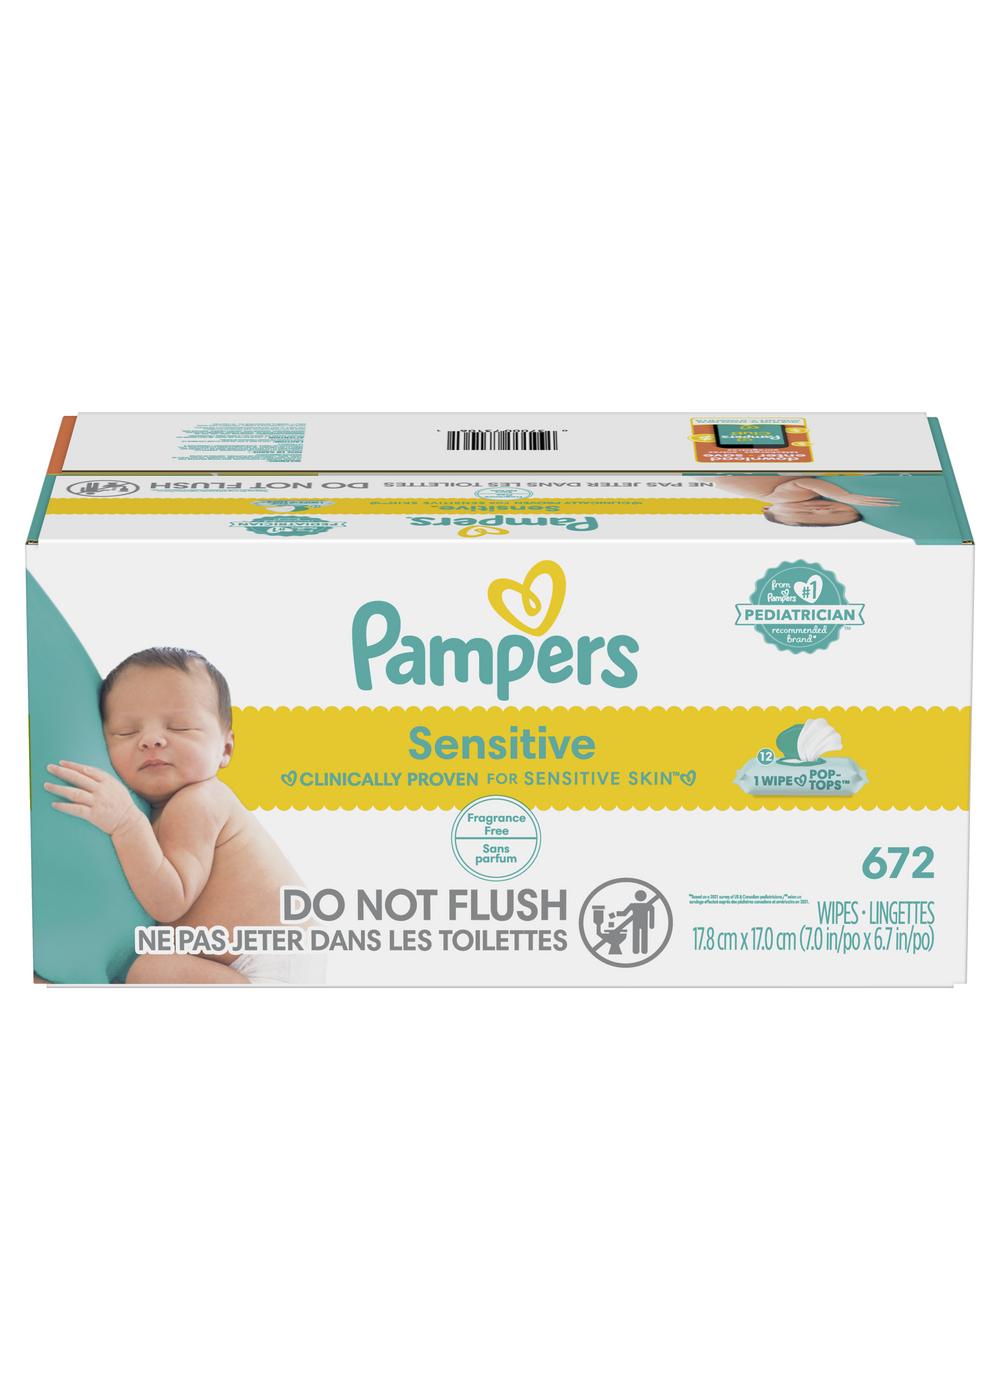 Pampers Sensitive Skin & Fragrance Free Baby Wipes 12 Pk; image 1 of 10